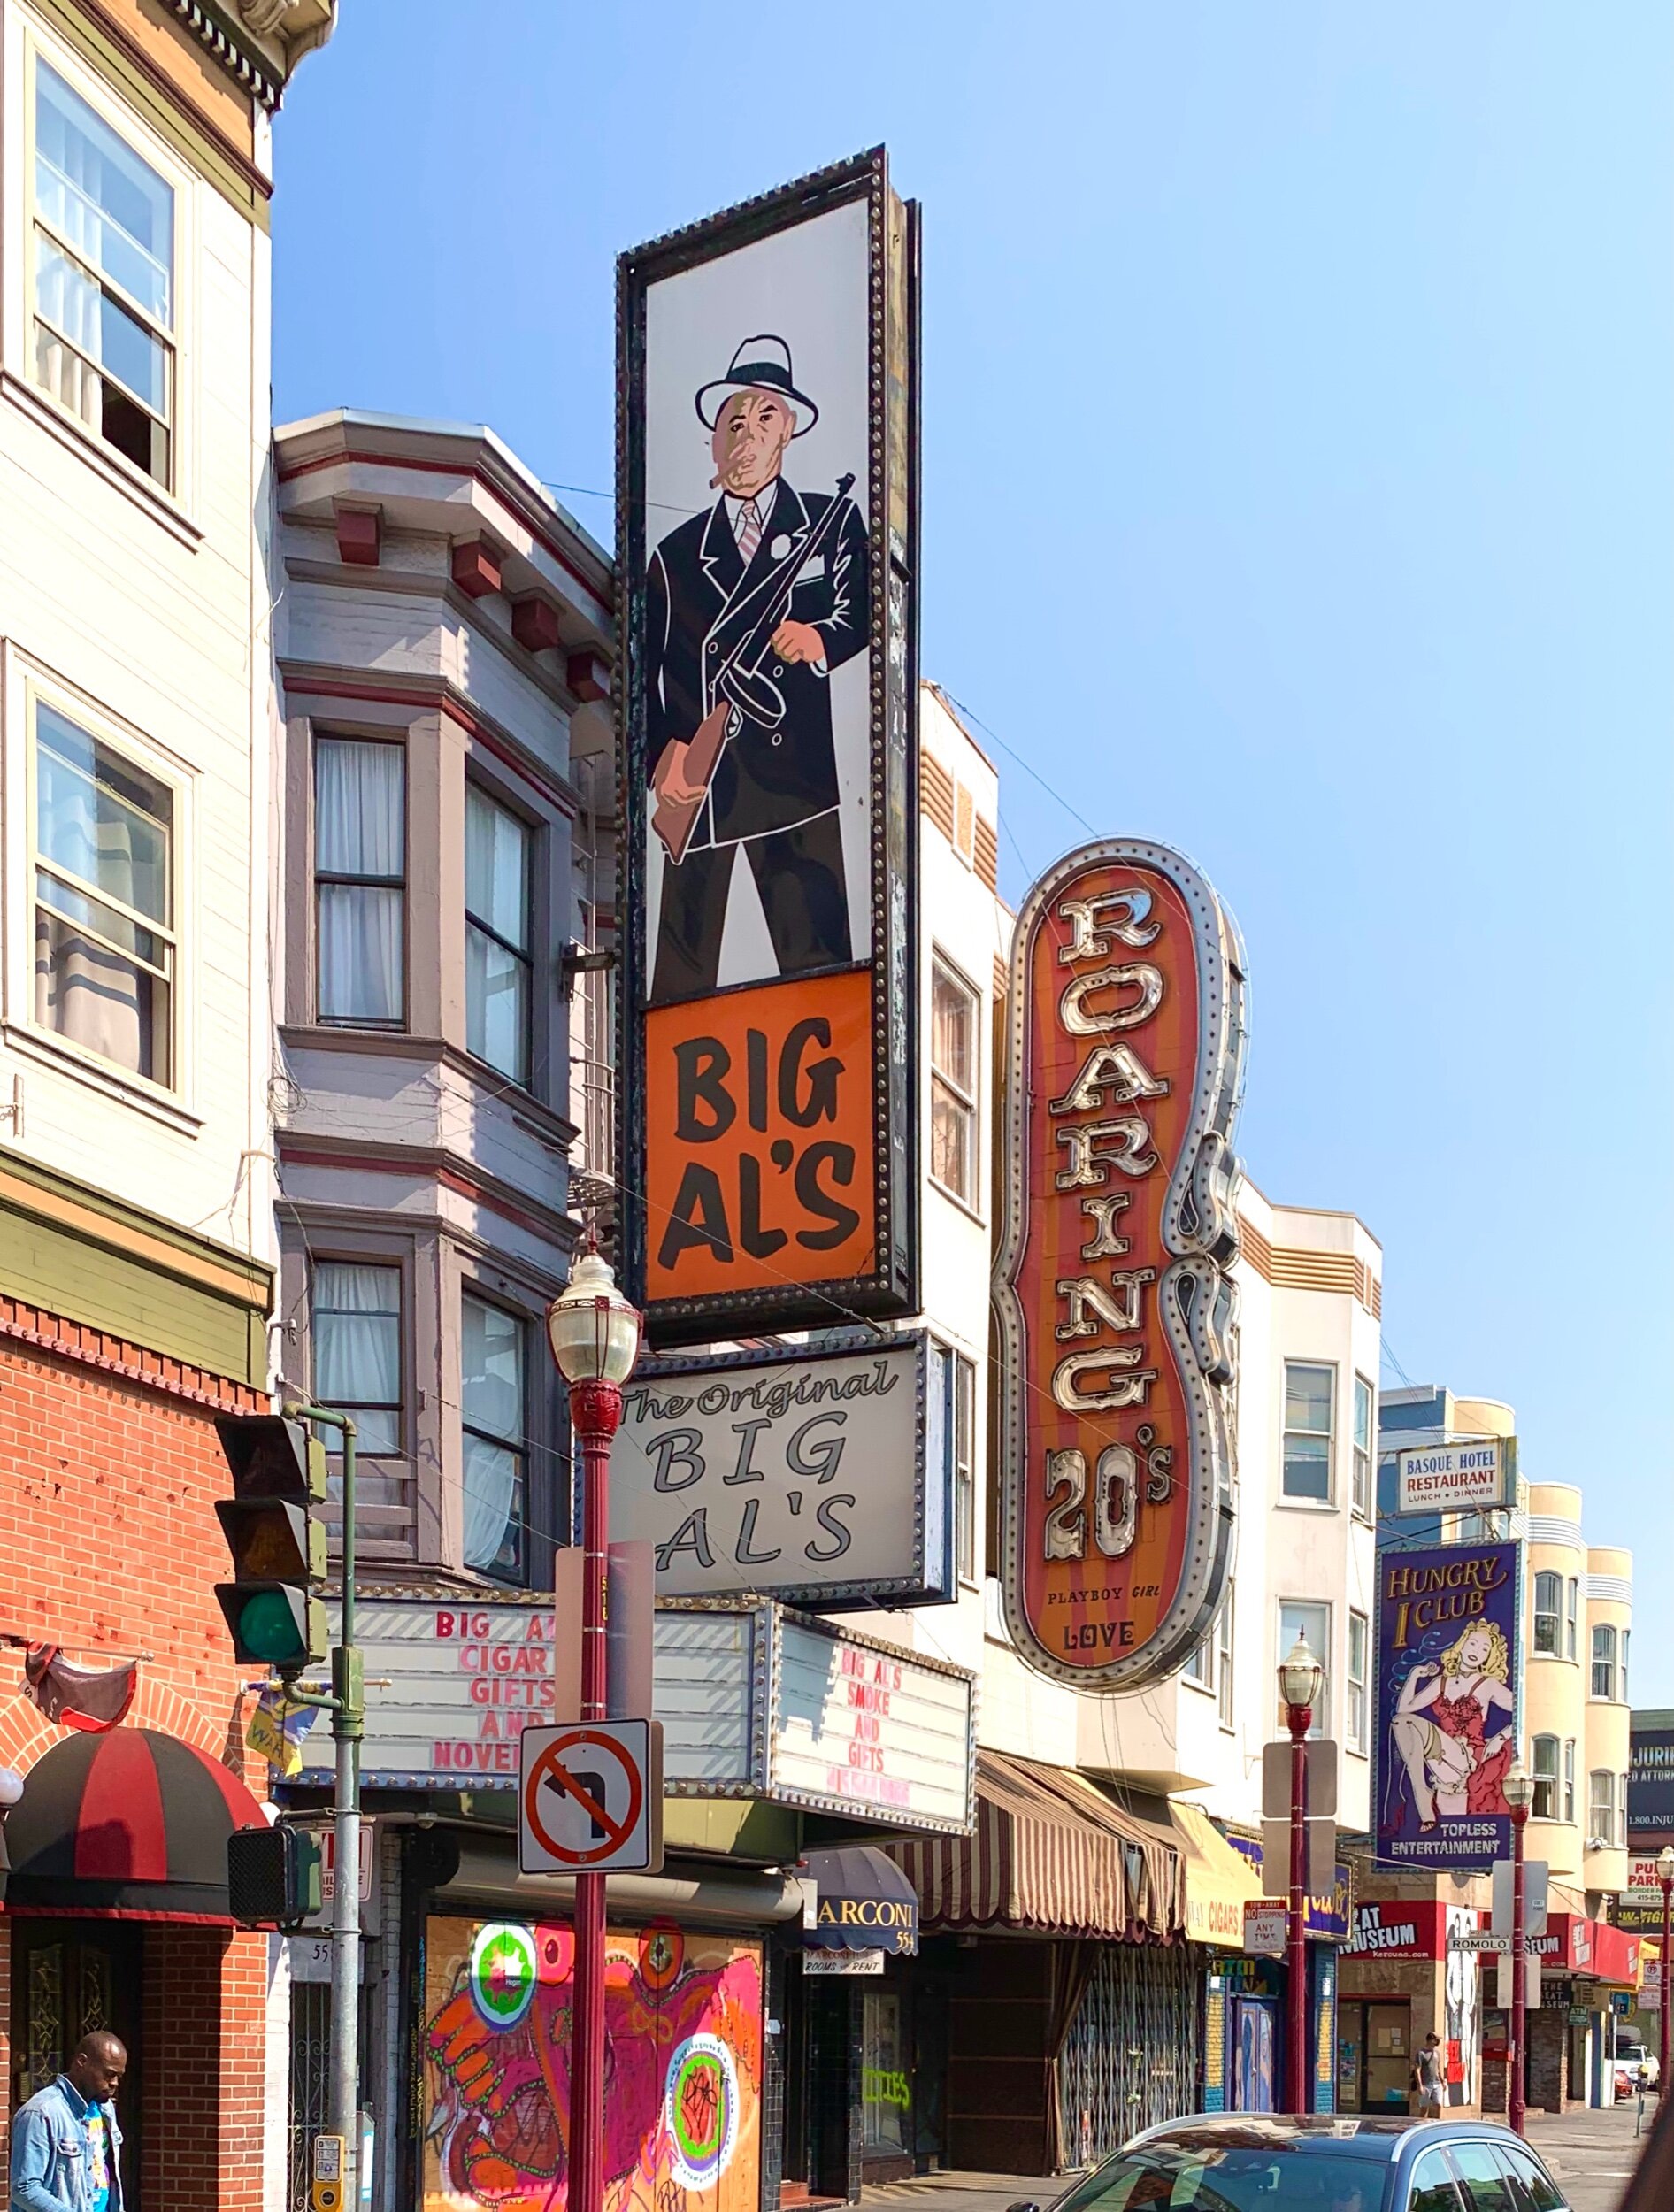  I took this photo because I thought the Big Al’s sign in San Francisco looked antique and nostalgic. I was unaware that the current sandwich shop with the 1960s sign had a far less savory history as an infamous trend-setting strip club.  We enjoyed 